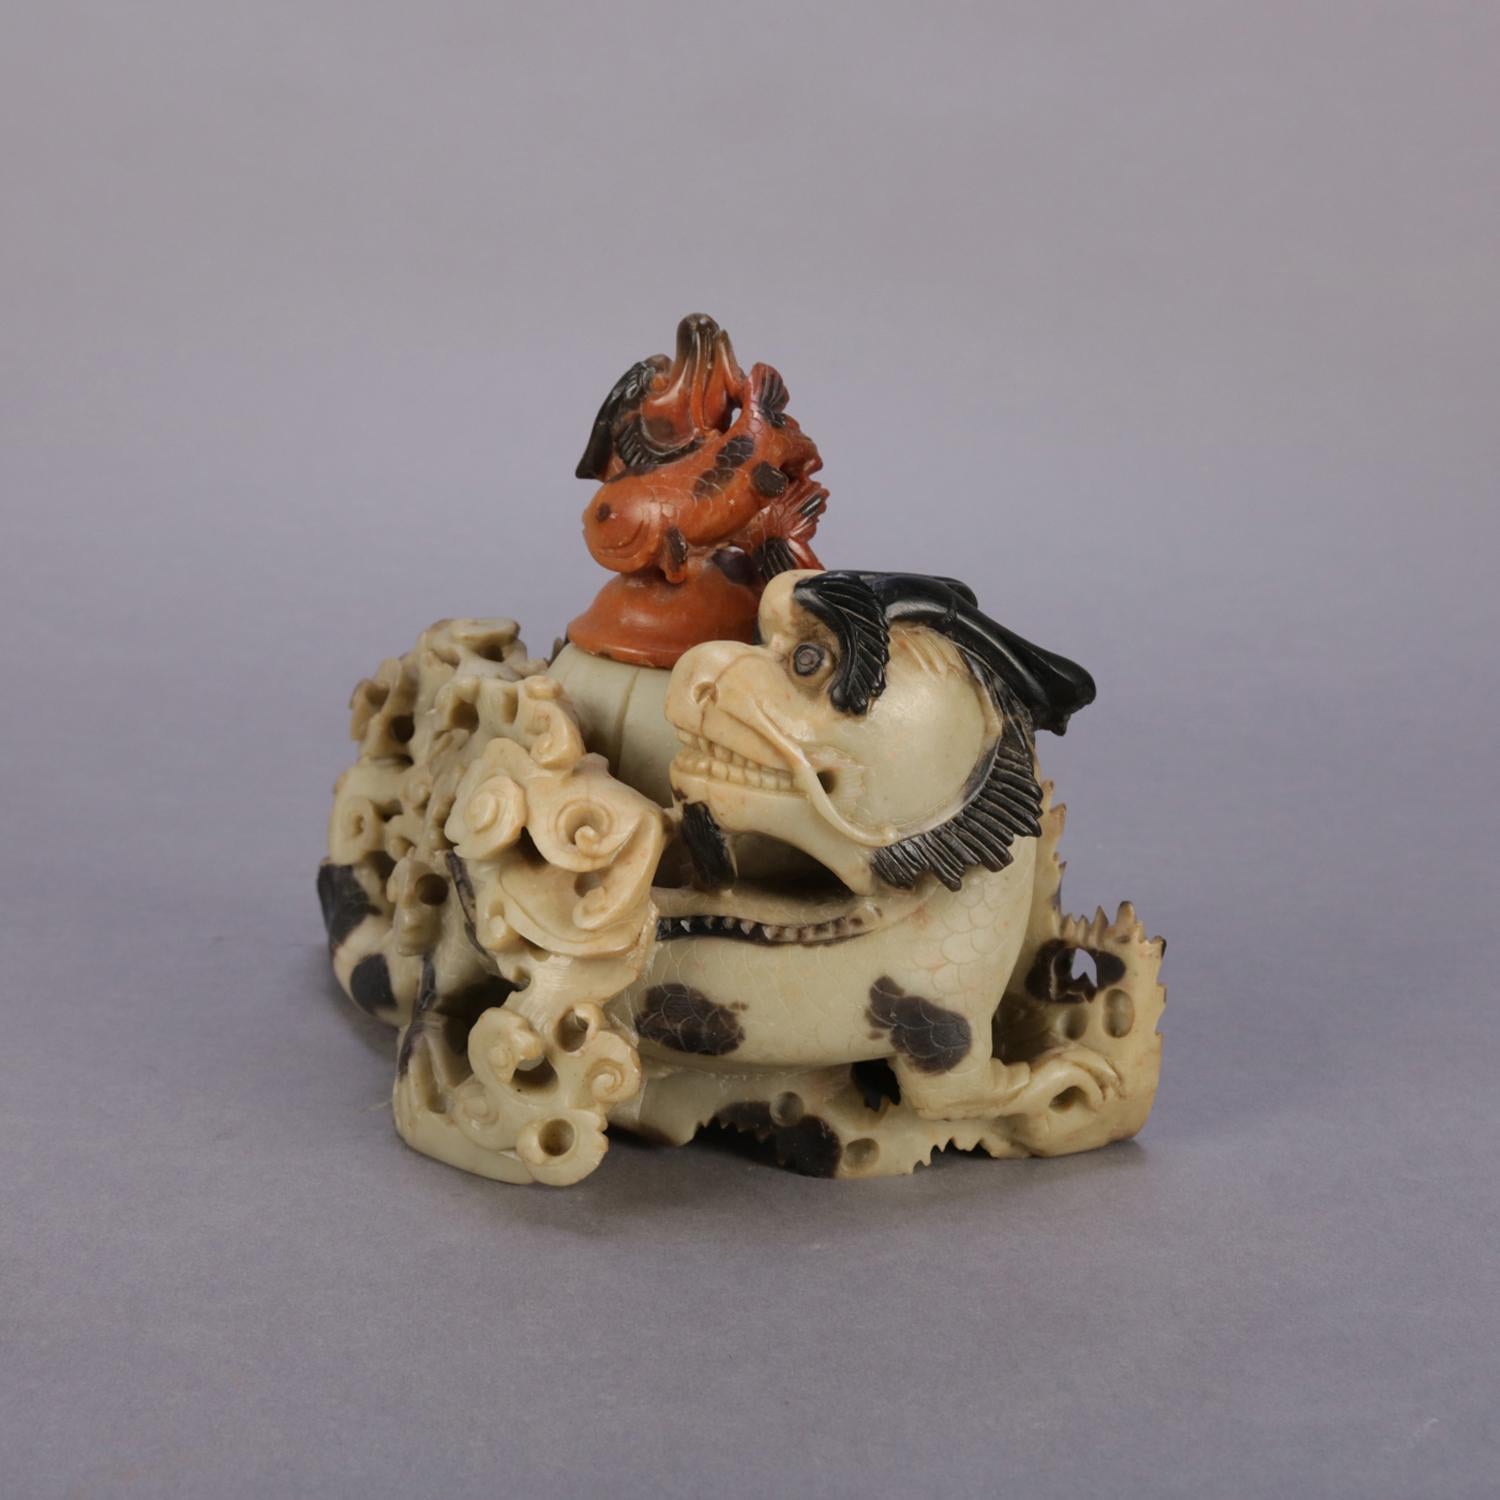 Antique figural Chinese carved soapstone sculptural inkwell features bi-colored dragon set in rolling sea waves and having carved top with koi (fish) finial, en verso dated with carved, 1900.

Measures: 5.75